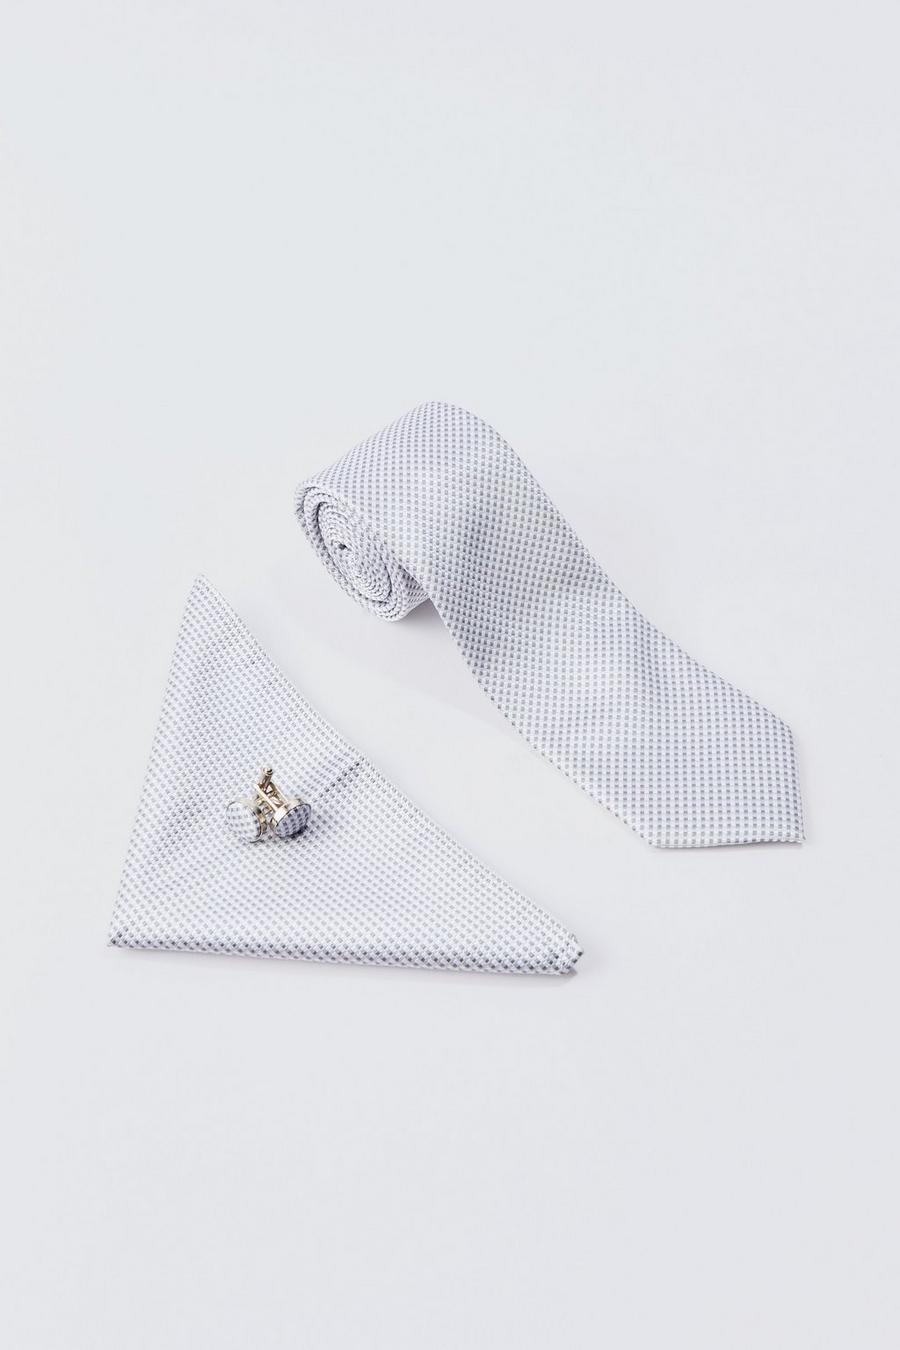 Slim Tie, Pocket Square And Cuff Links Set In Light Grey